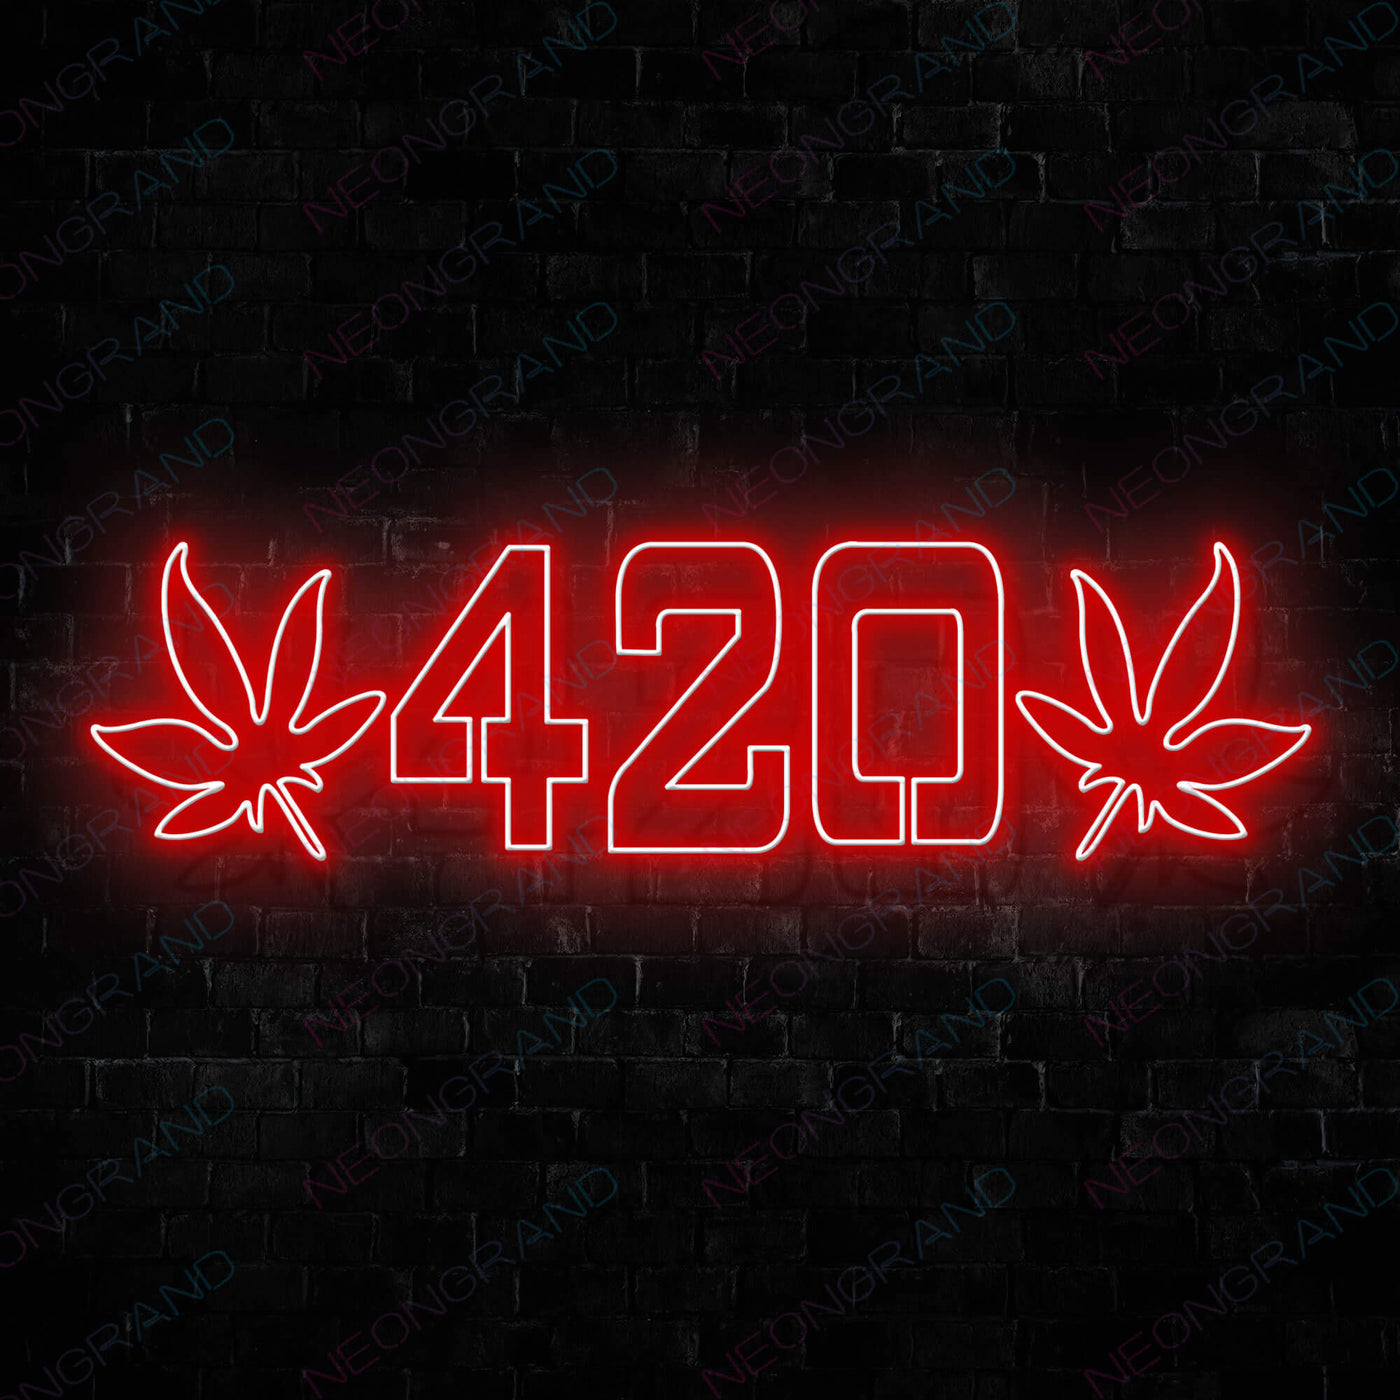 Cannabis 420 Weed Neon Sign Led Light red